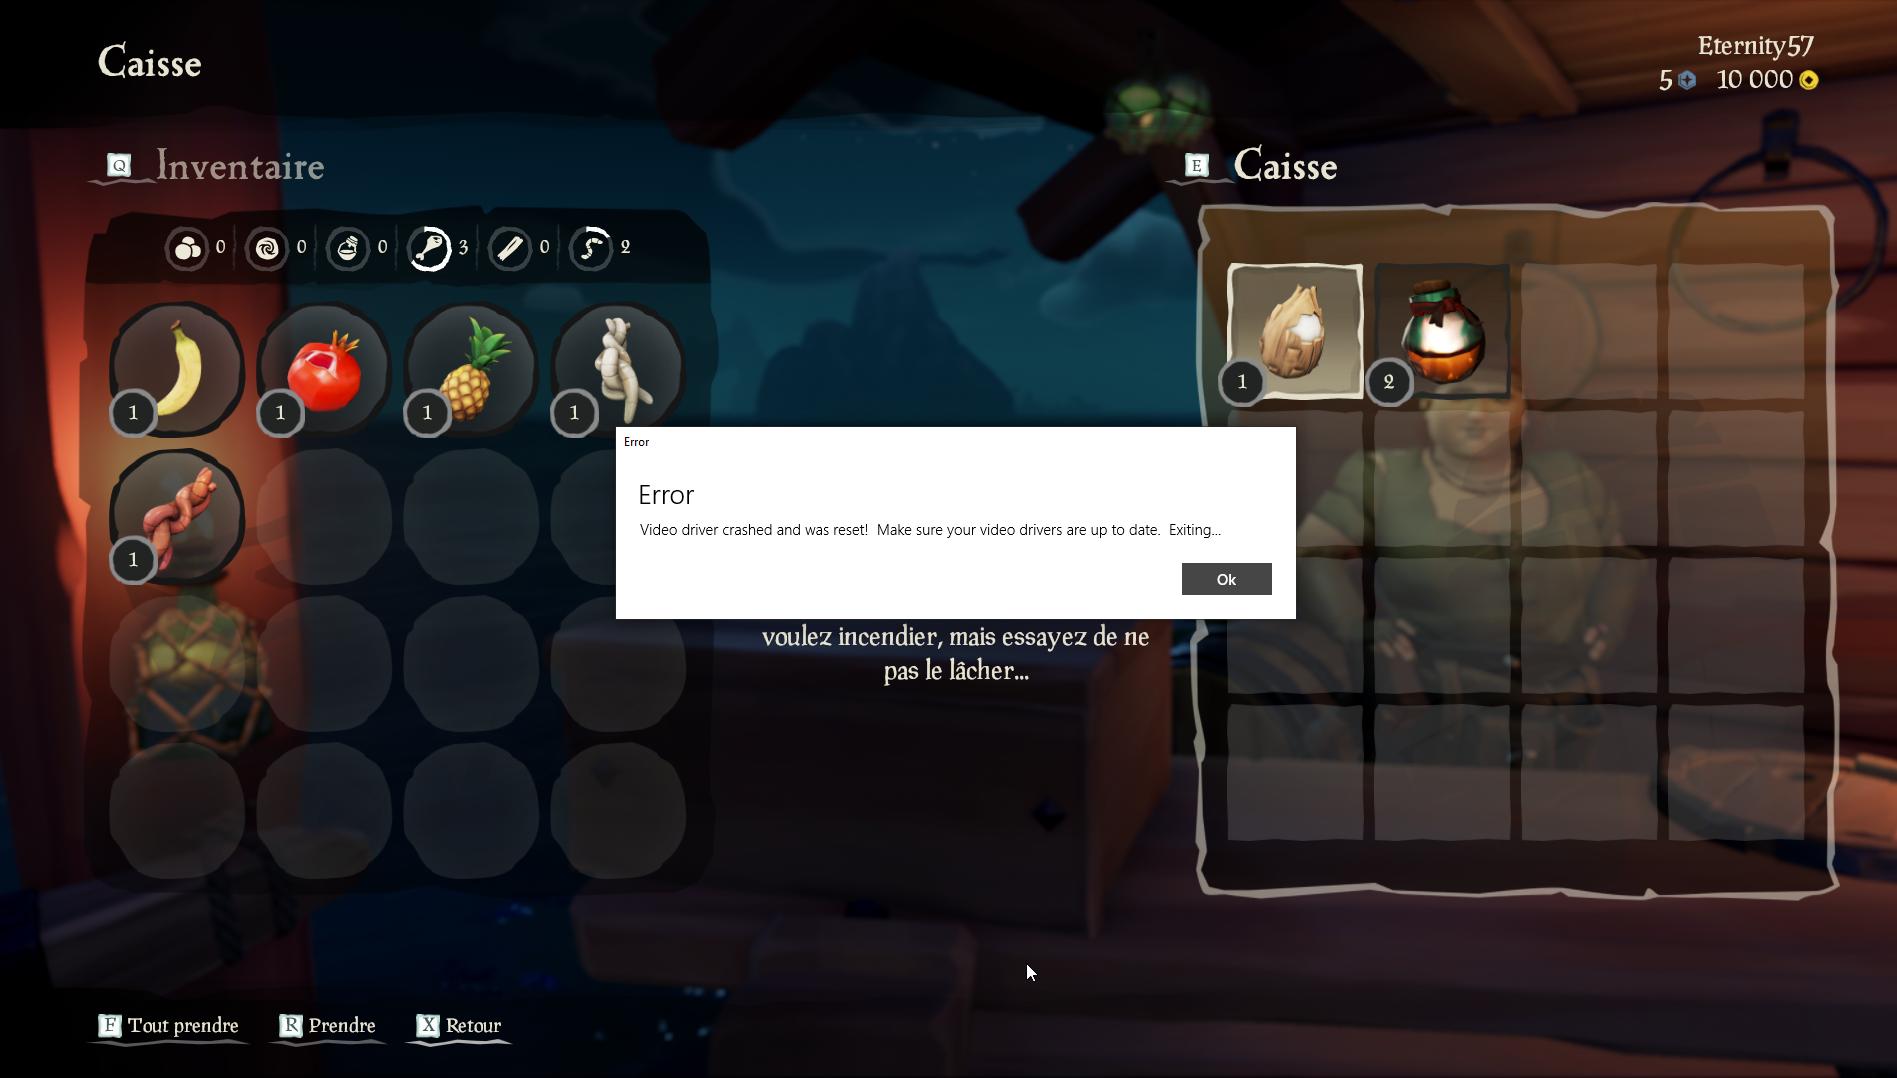 sea of thieves video driver crashed and was reset